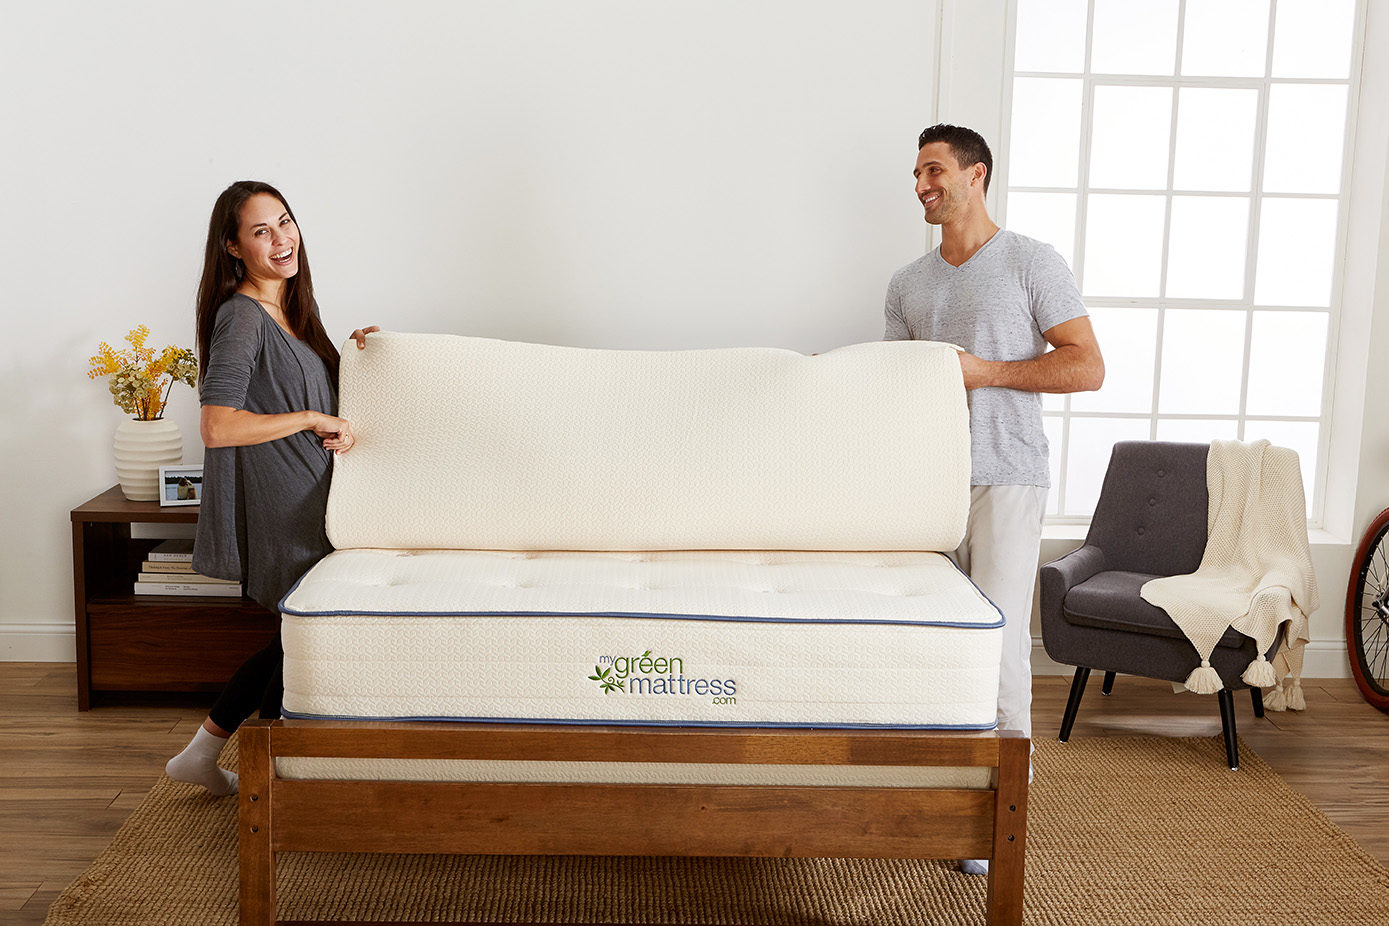 Couple layes mattess topper atop white mattress carrying My Green Mattress branding. wood bedframe stands atop textured brown rug and dark wood flooring. nightstand and gray unholstered chair in background; large white window and white wallsatop 